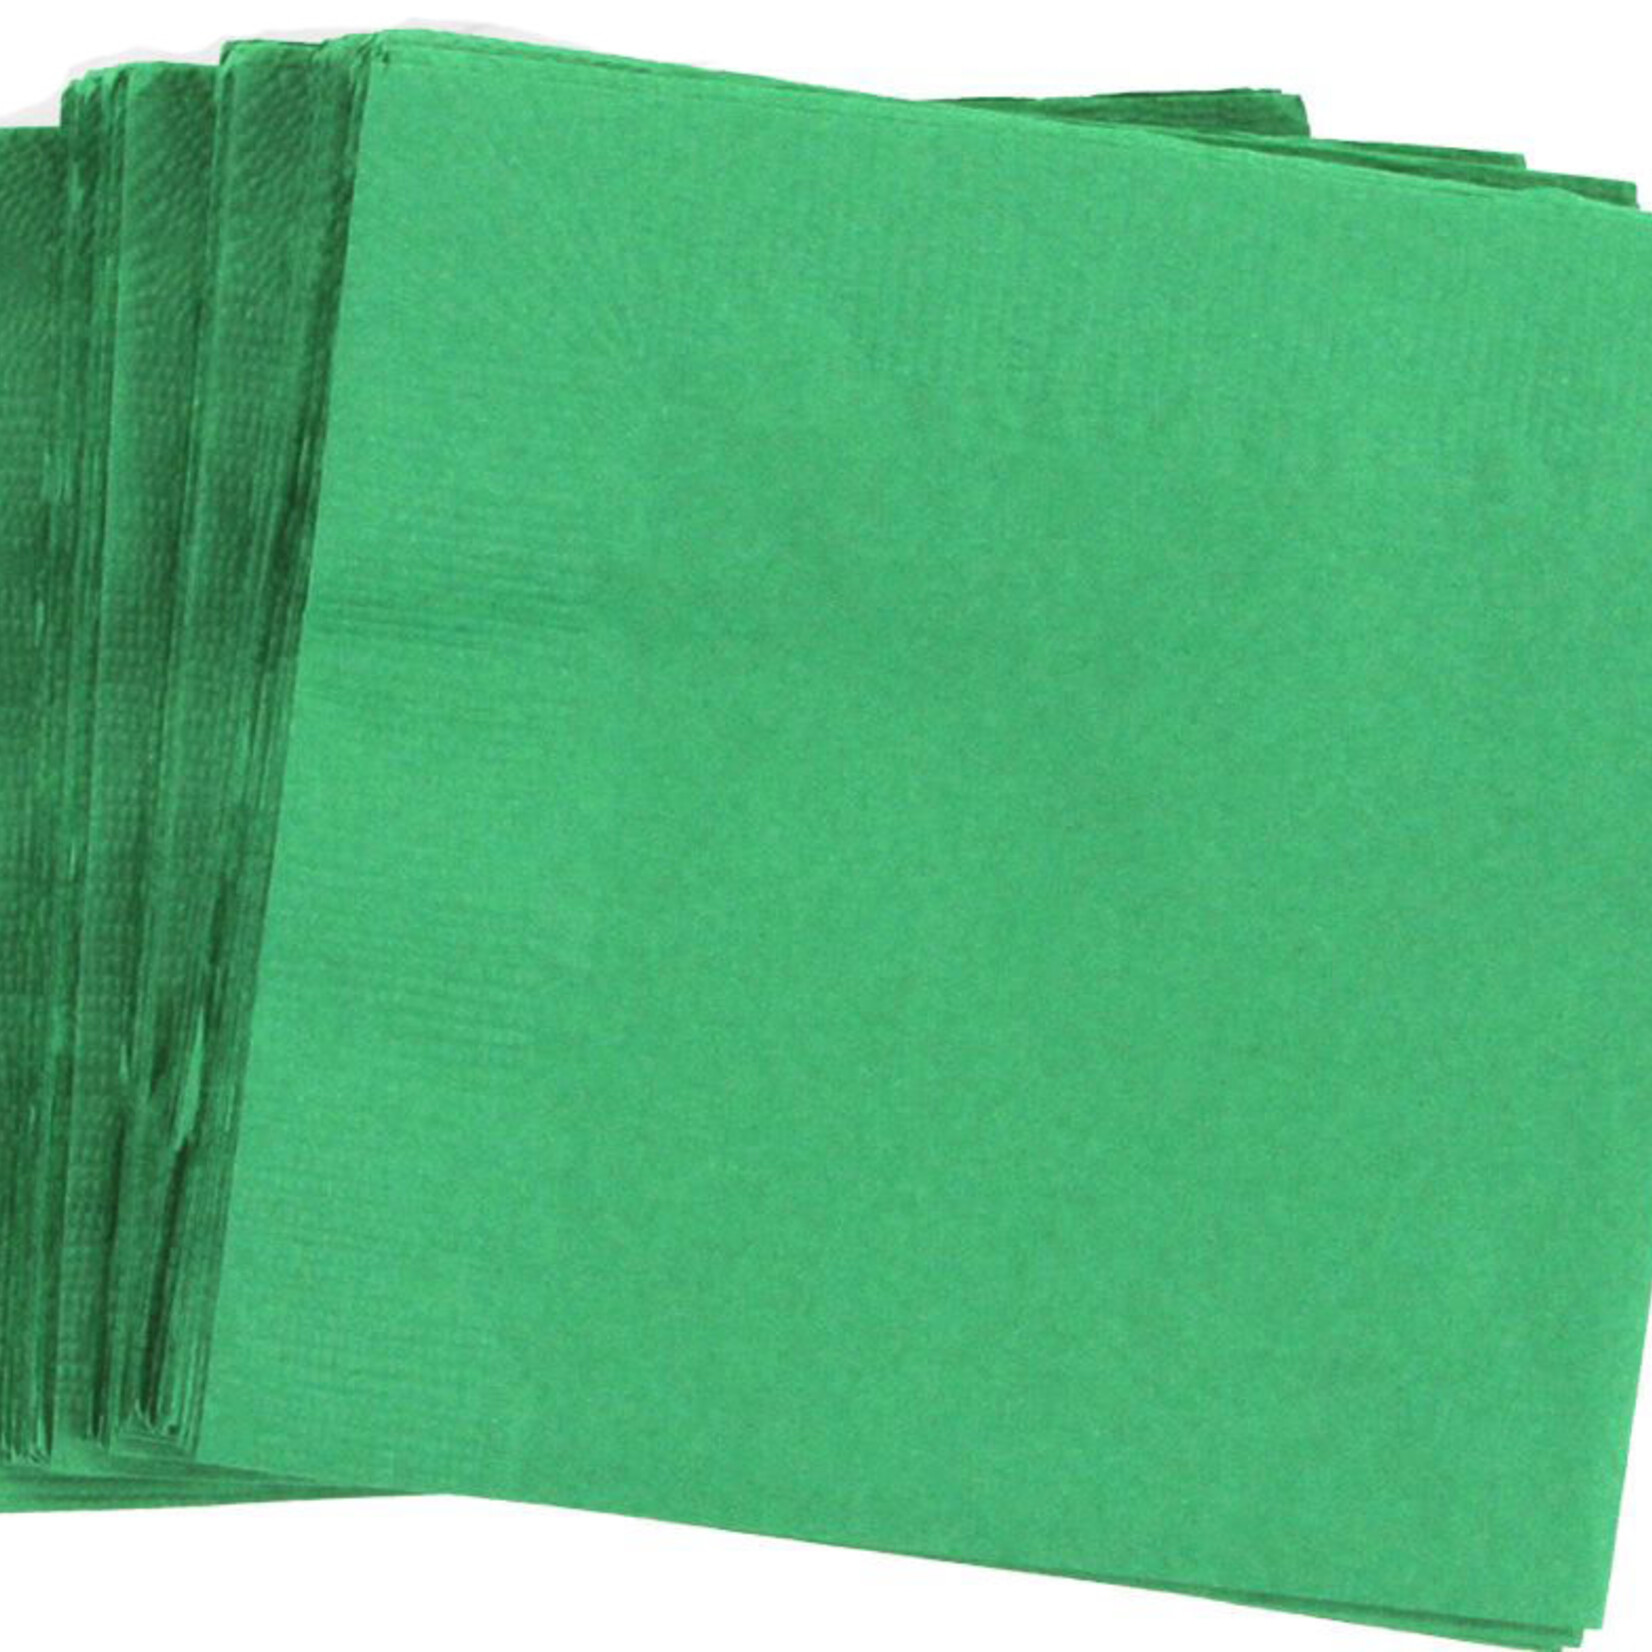 2-Ply Napkin 13 inches x 13 inches (20 pieces)